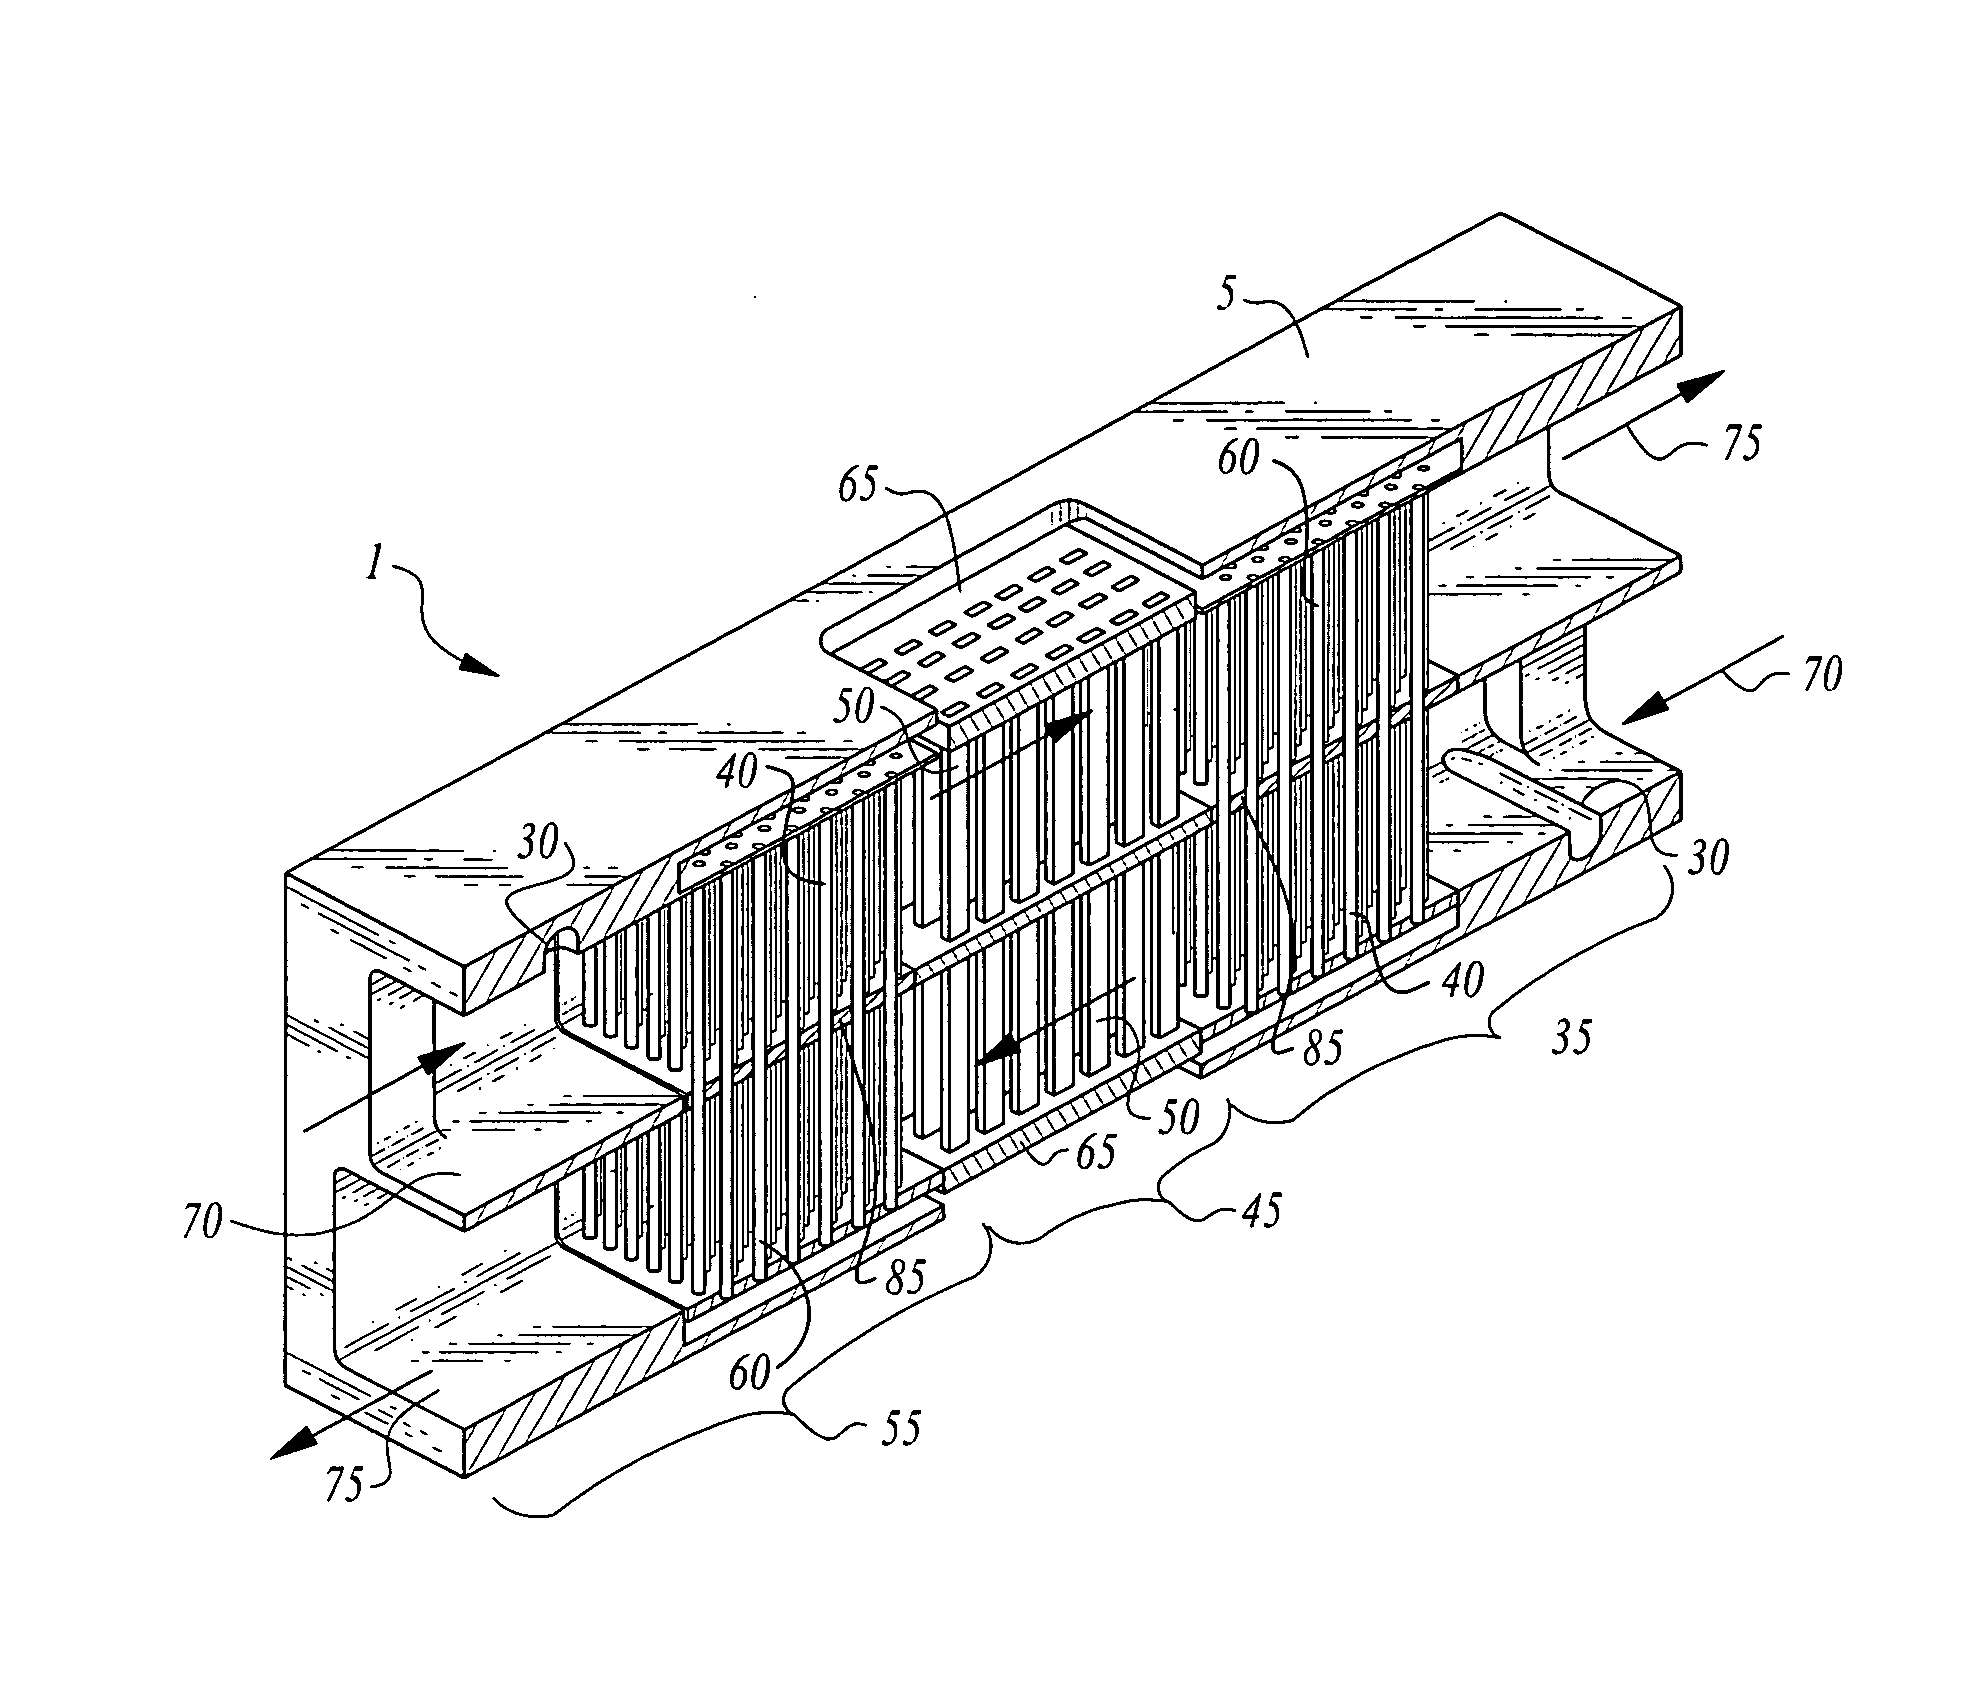 Micro-combustion power system with dual path counter-flow system